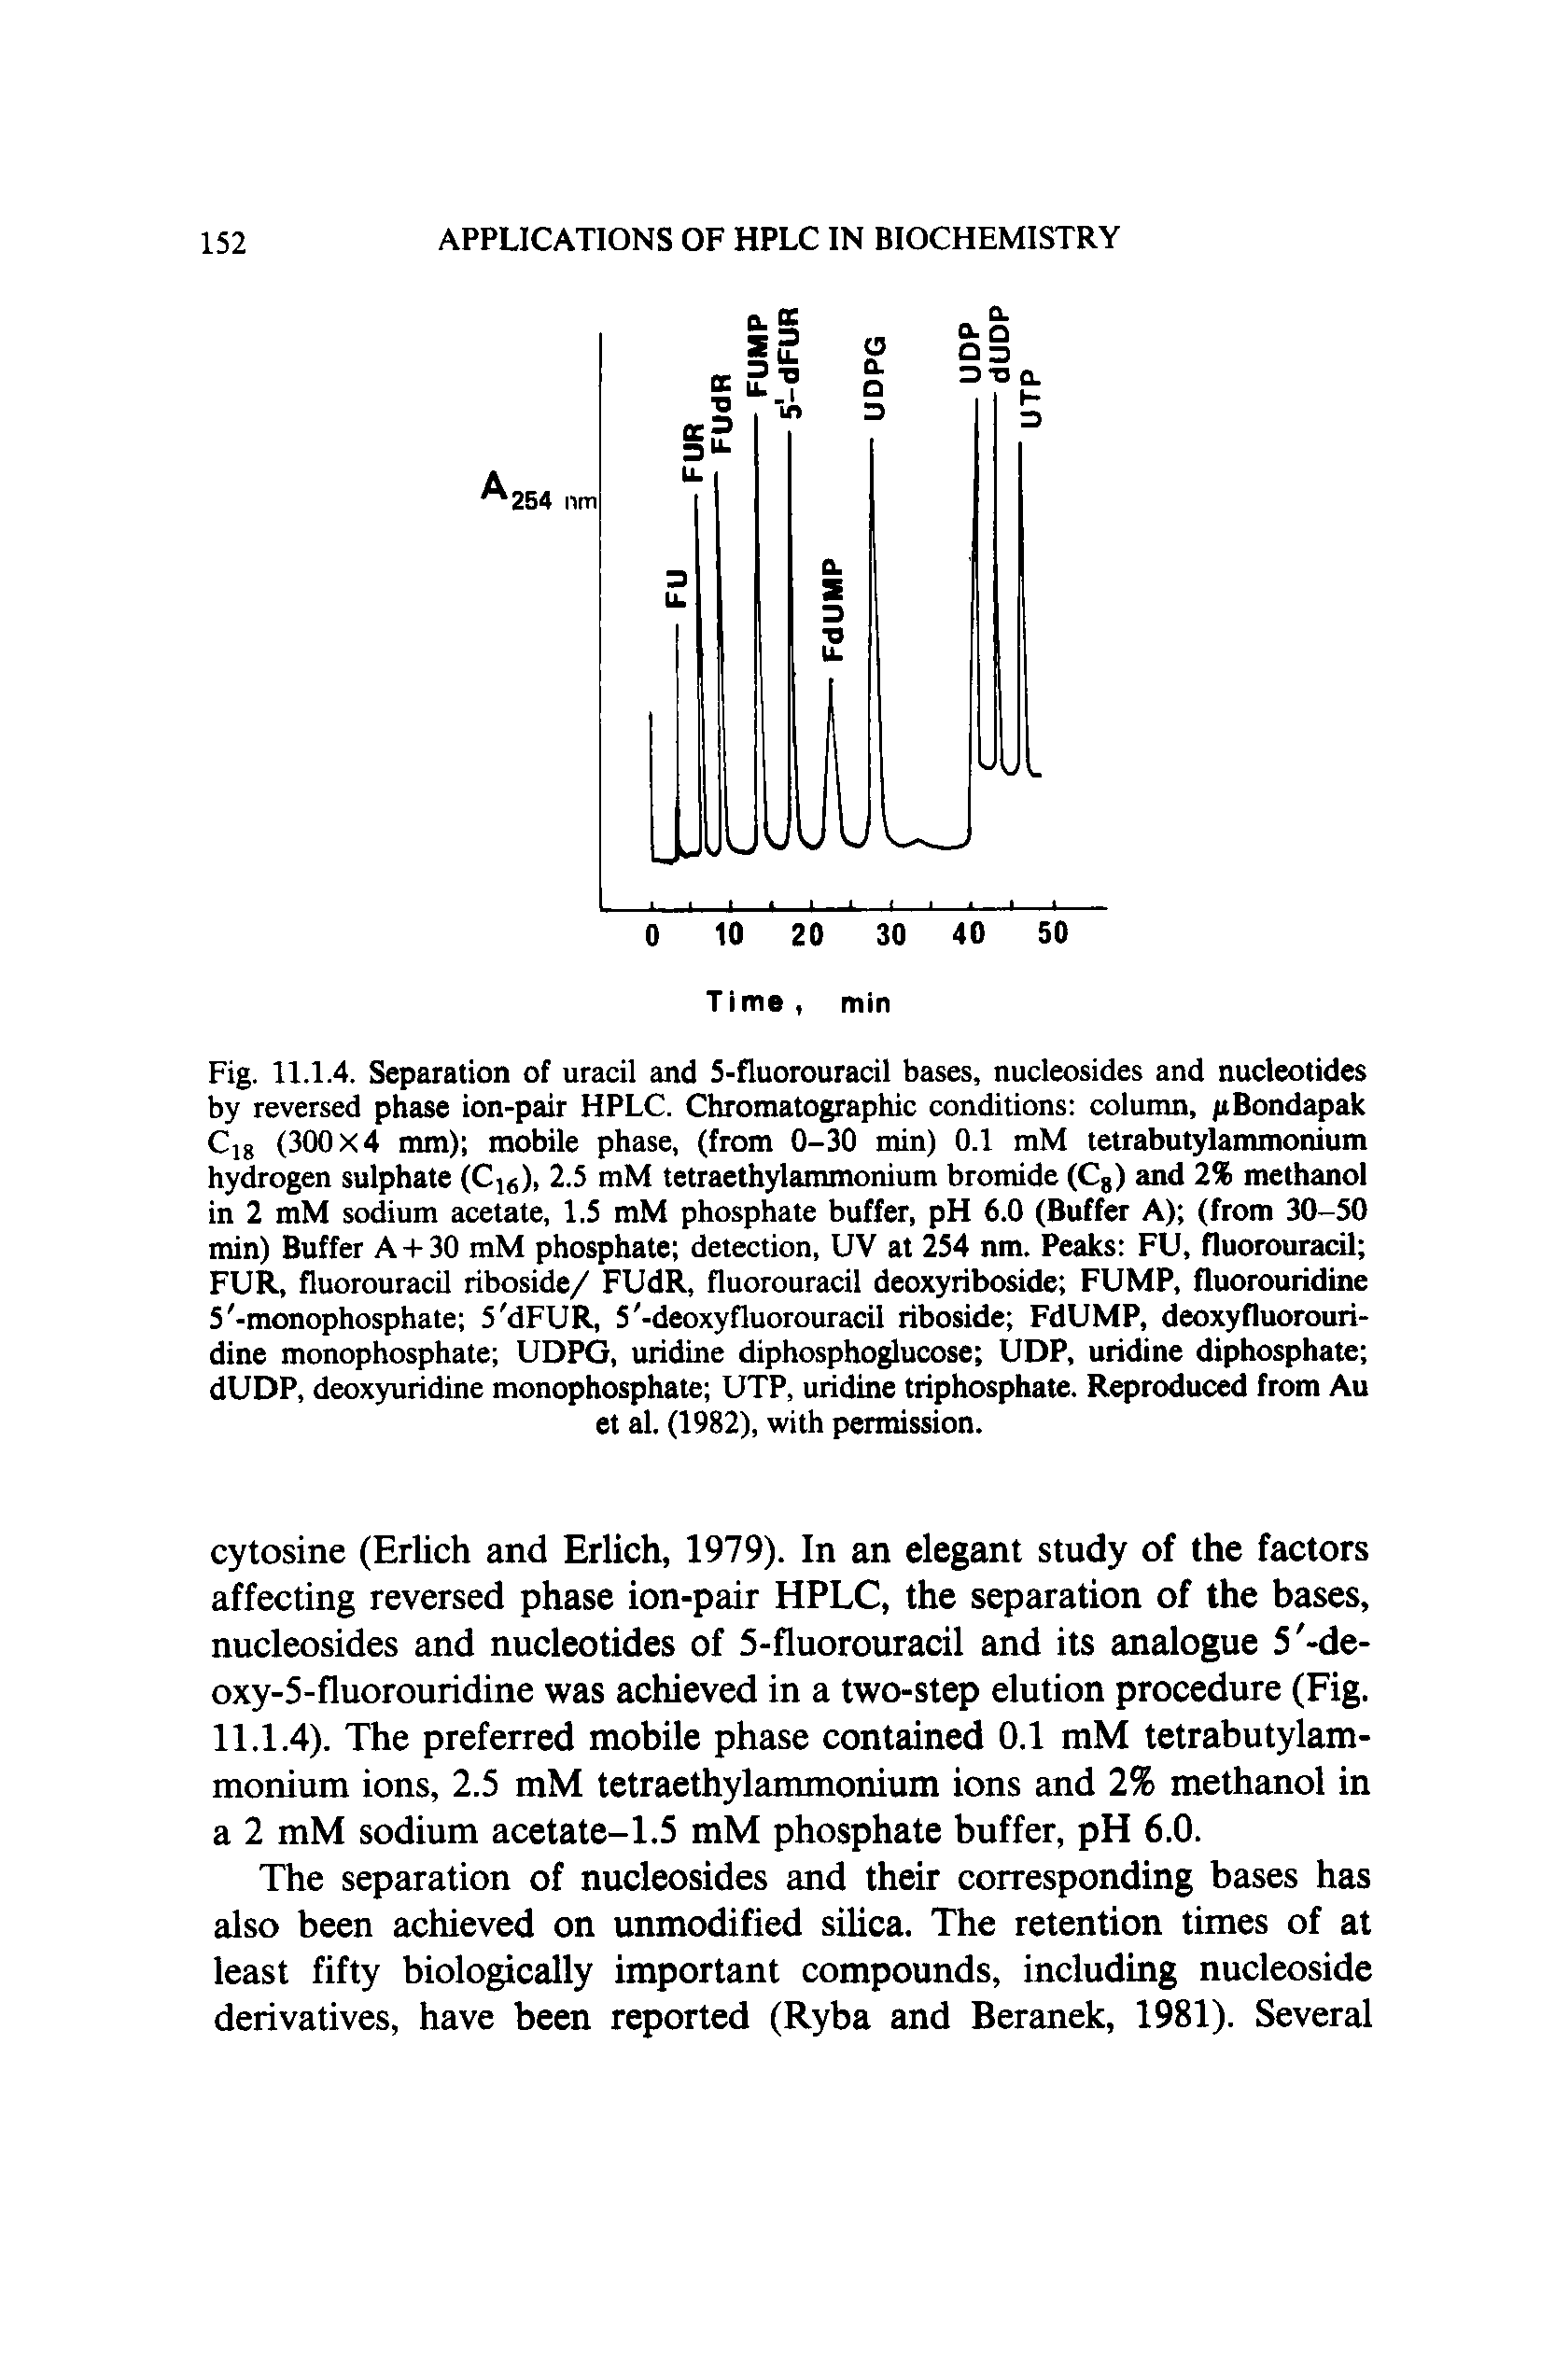 Fig. 11.1.4. Separation of uracil and 5-fluorouracil bases, nucleosides and nucleotides by reversed phase ion-pair HPLC. Chromatographic conditions column, Bondapak Cig (300 x 4 mm) mobile phase, (from 0-30 min) 0.1 mM tetrabutylammonium hydrogen sulphate (Cjg), 2.5 mM tetraethylammonium bromide (Cg) and 2% methanol in 2 mM sodium acetate, 1.5 mM phosphate buffer, pH 6.0 (Buffer A) (from 30-50 min) Buffer A-i-30 mM phosphate detection, UV at 254 nm. Peaks FU, fluorouracil FUR, fluorouracU riboside/ FUdR, fluorouracil deoxyriboside FUMP, fluorouridine 5 -monophosphate 5 dFUR, 5 -deoxyfluorouracil riboside FdUMP, deoxyfluorouri-dine monophosphate UDPG, uridine diphosphoglucose UDP, uridine diphosphate dUDP, deoxyuridine monophosphate UTP, uridine triphosphate. Reproduced from Au et al. (1982), with permission.